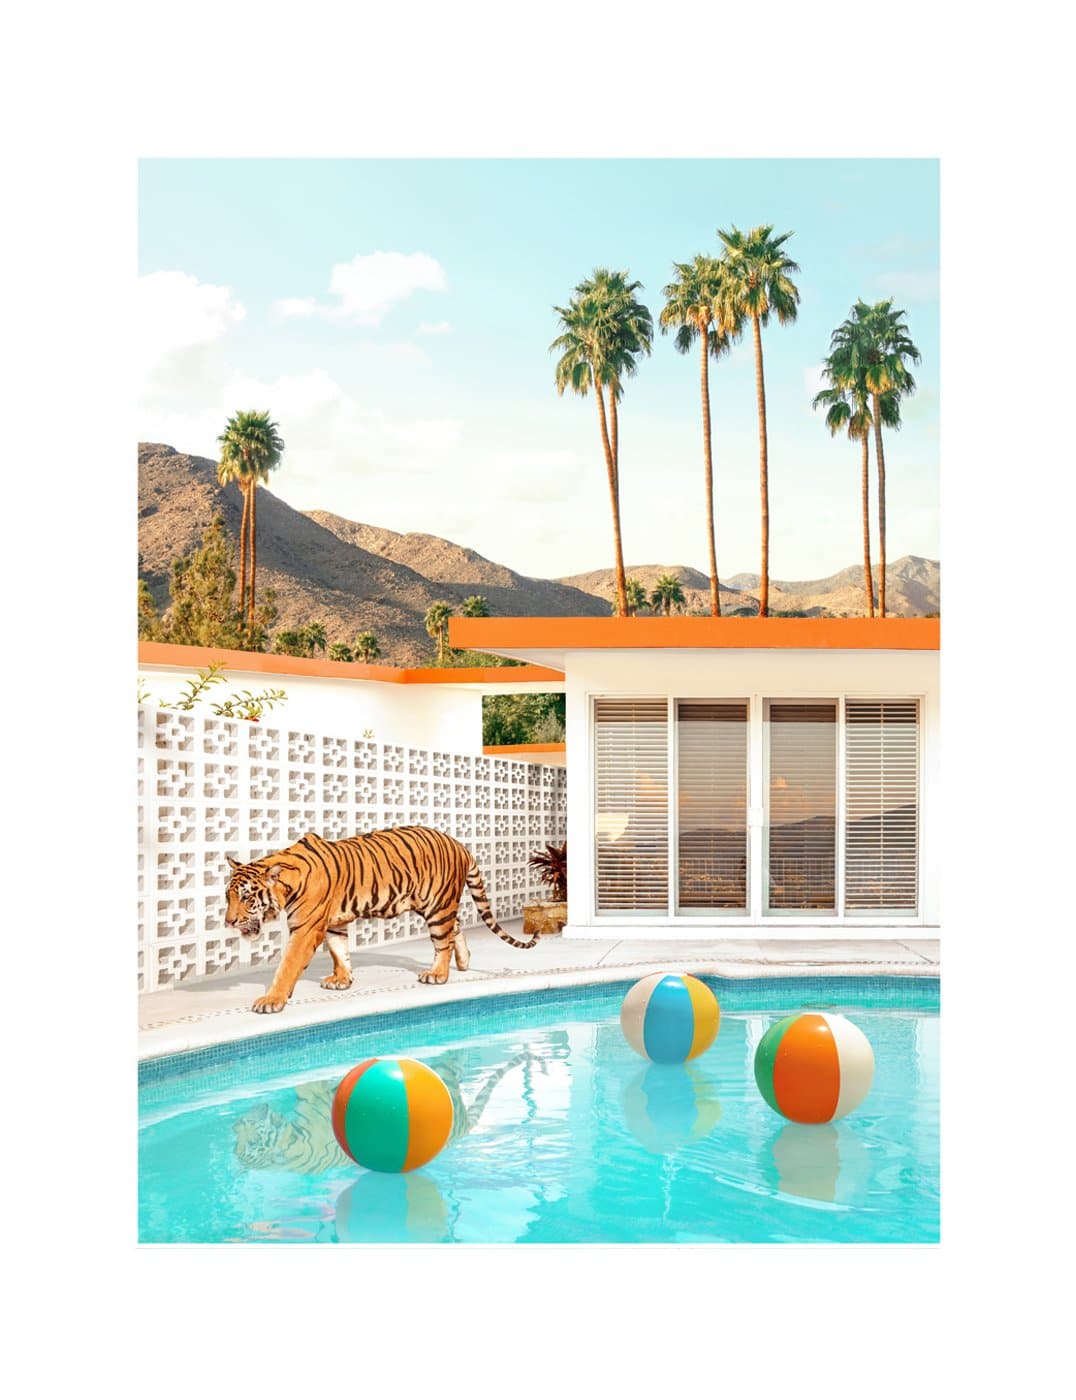 Image of Pool Desert Tiger artwork by Paul Fuentes, free delivery